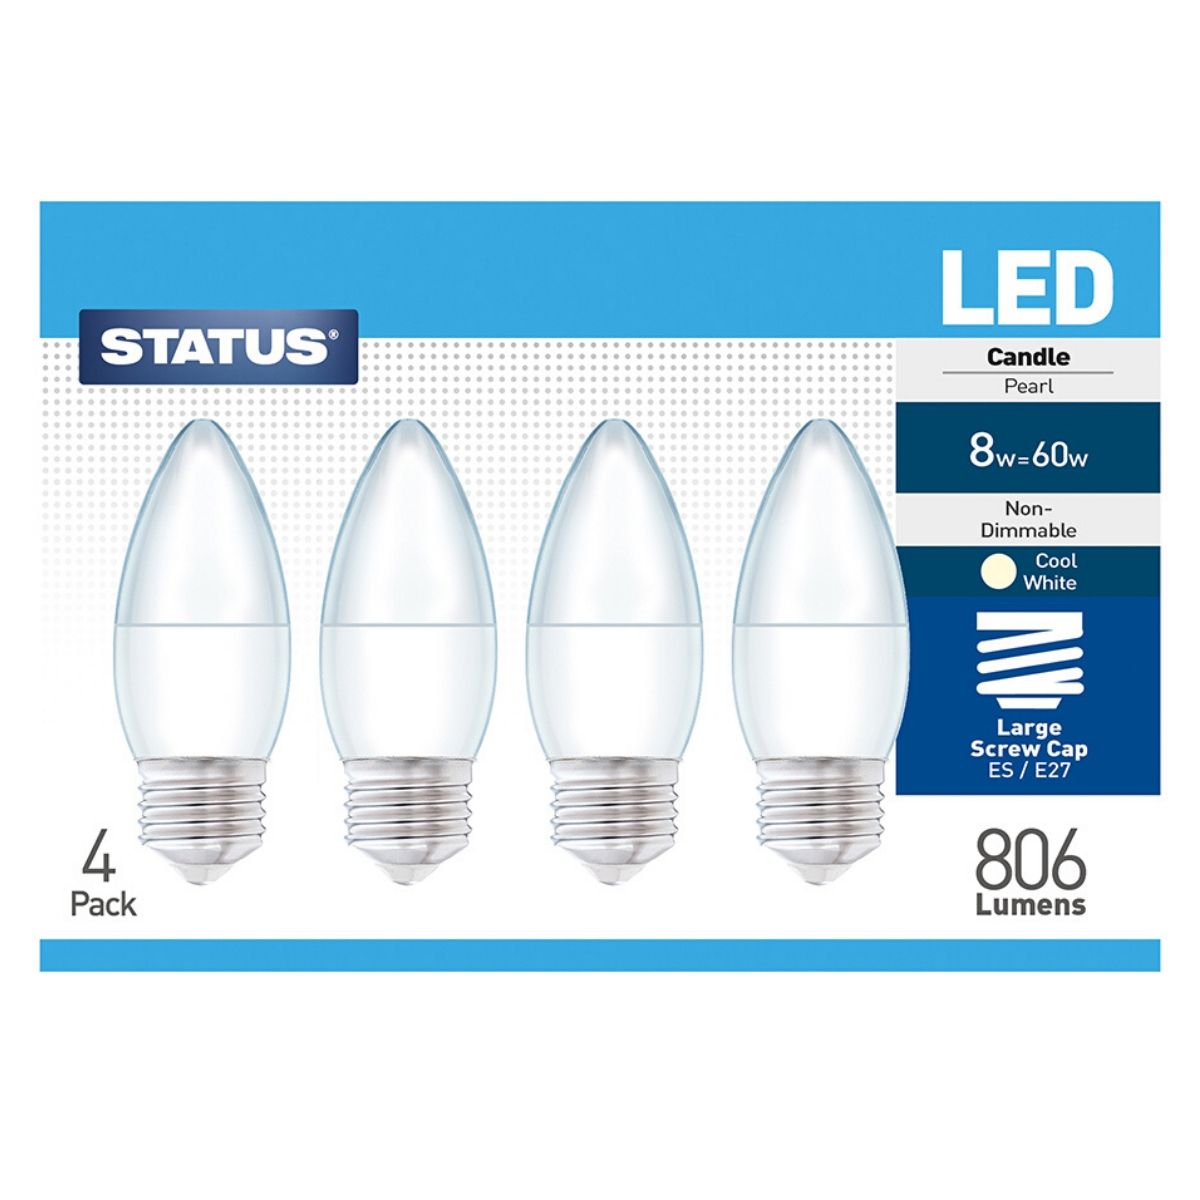 View 4 x E27 8w LED Candle Bulbs information